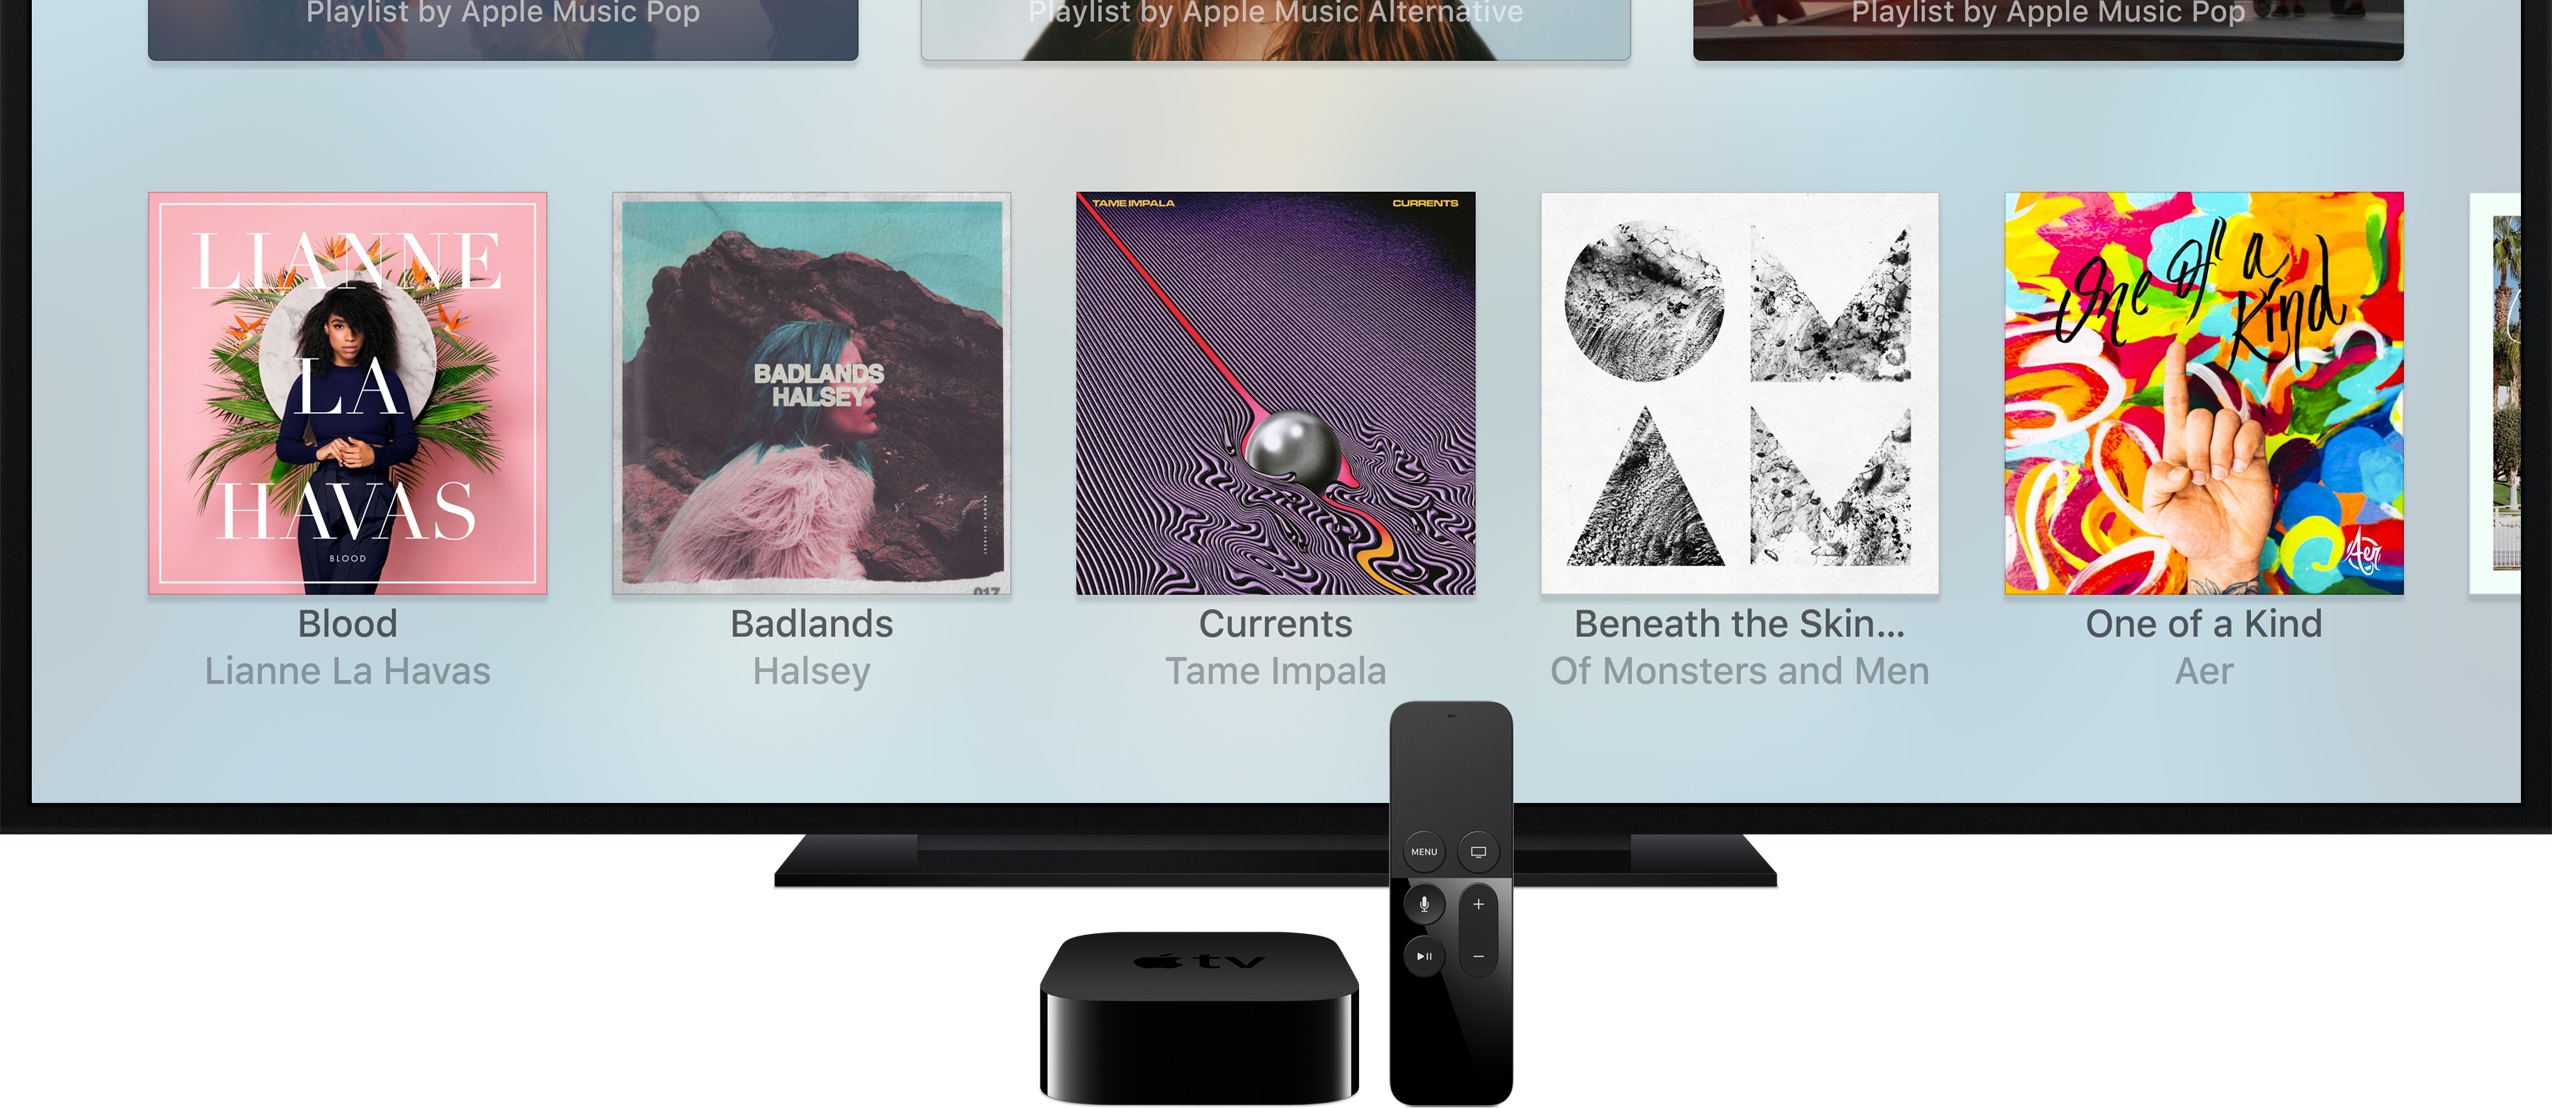 New Apple Tv Lacking Siri Search For Apple Music And App Store Apps